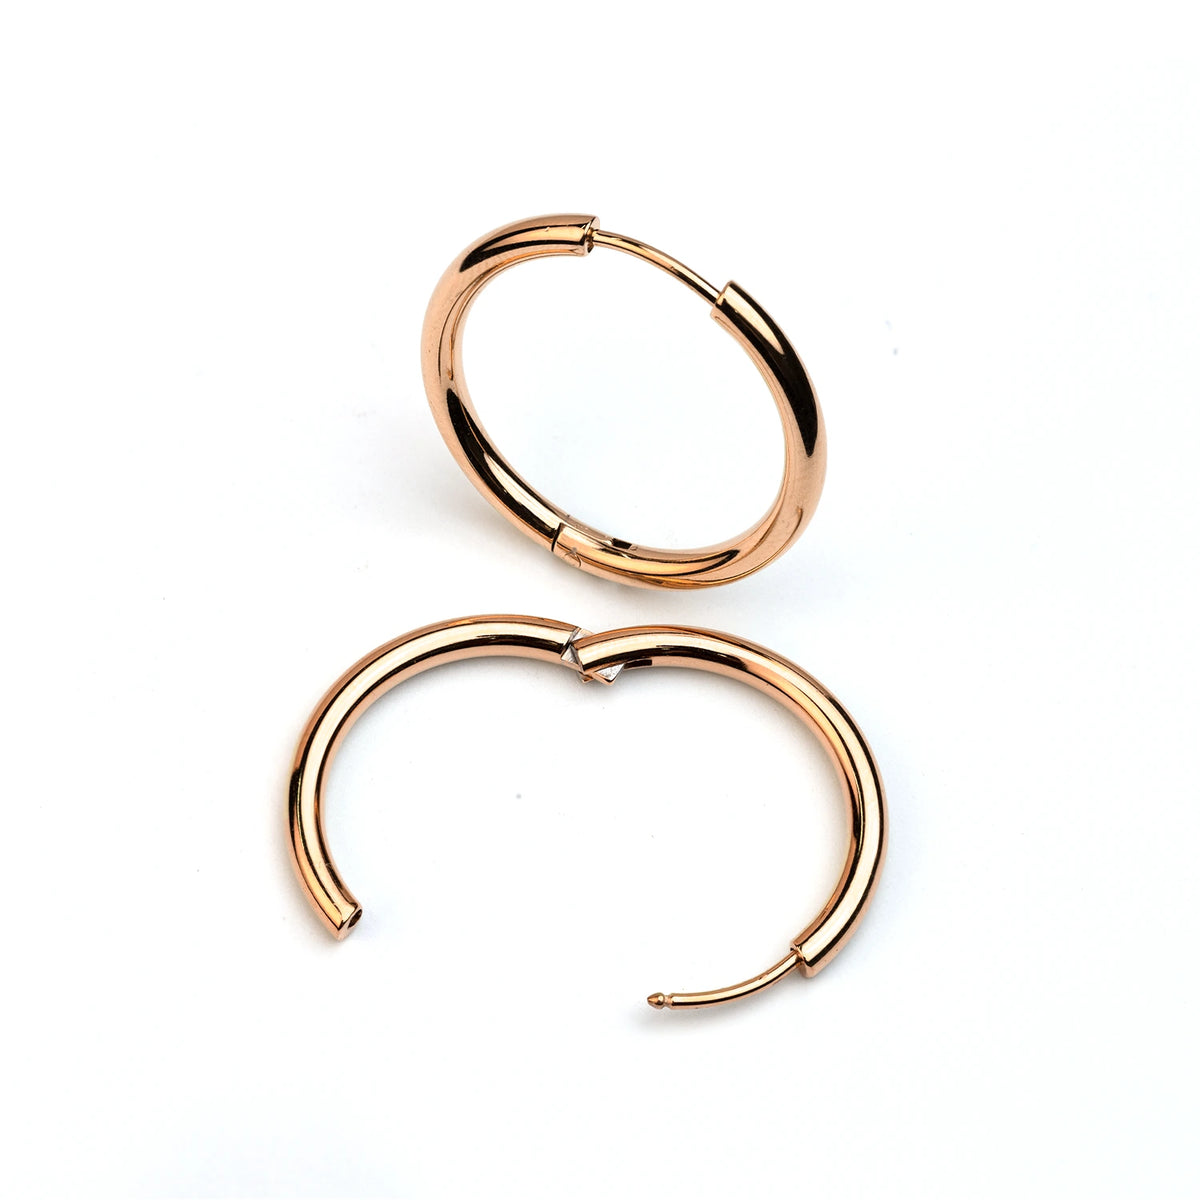 Mix & Match hoop earrings stainless steel 1" | Rose gold